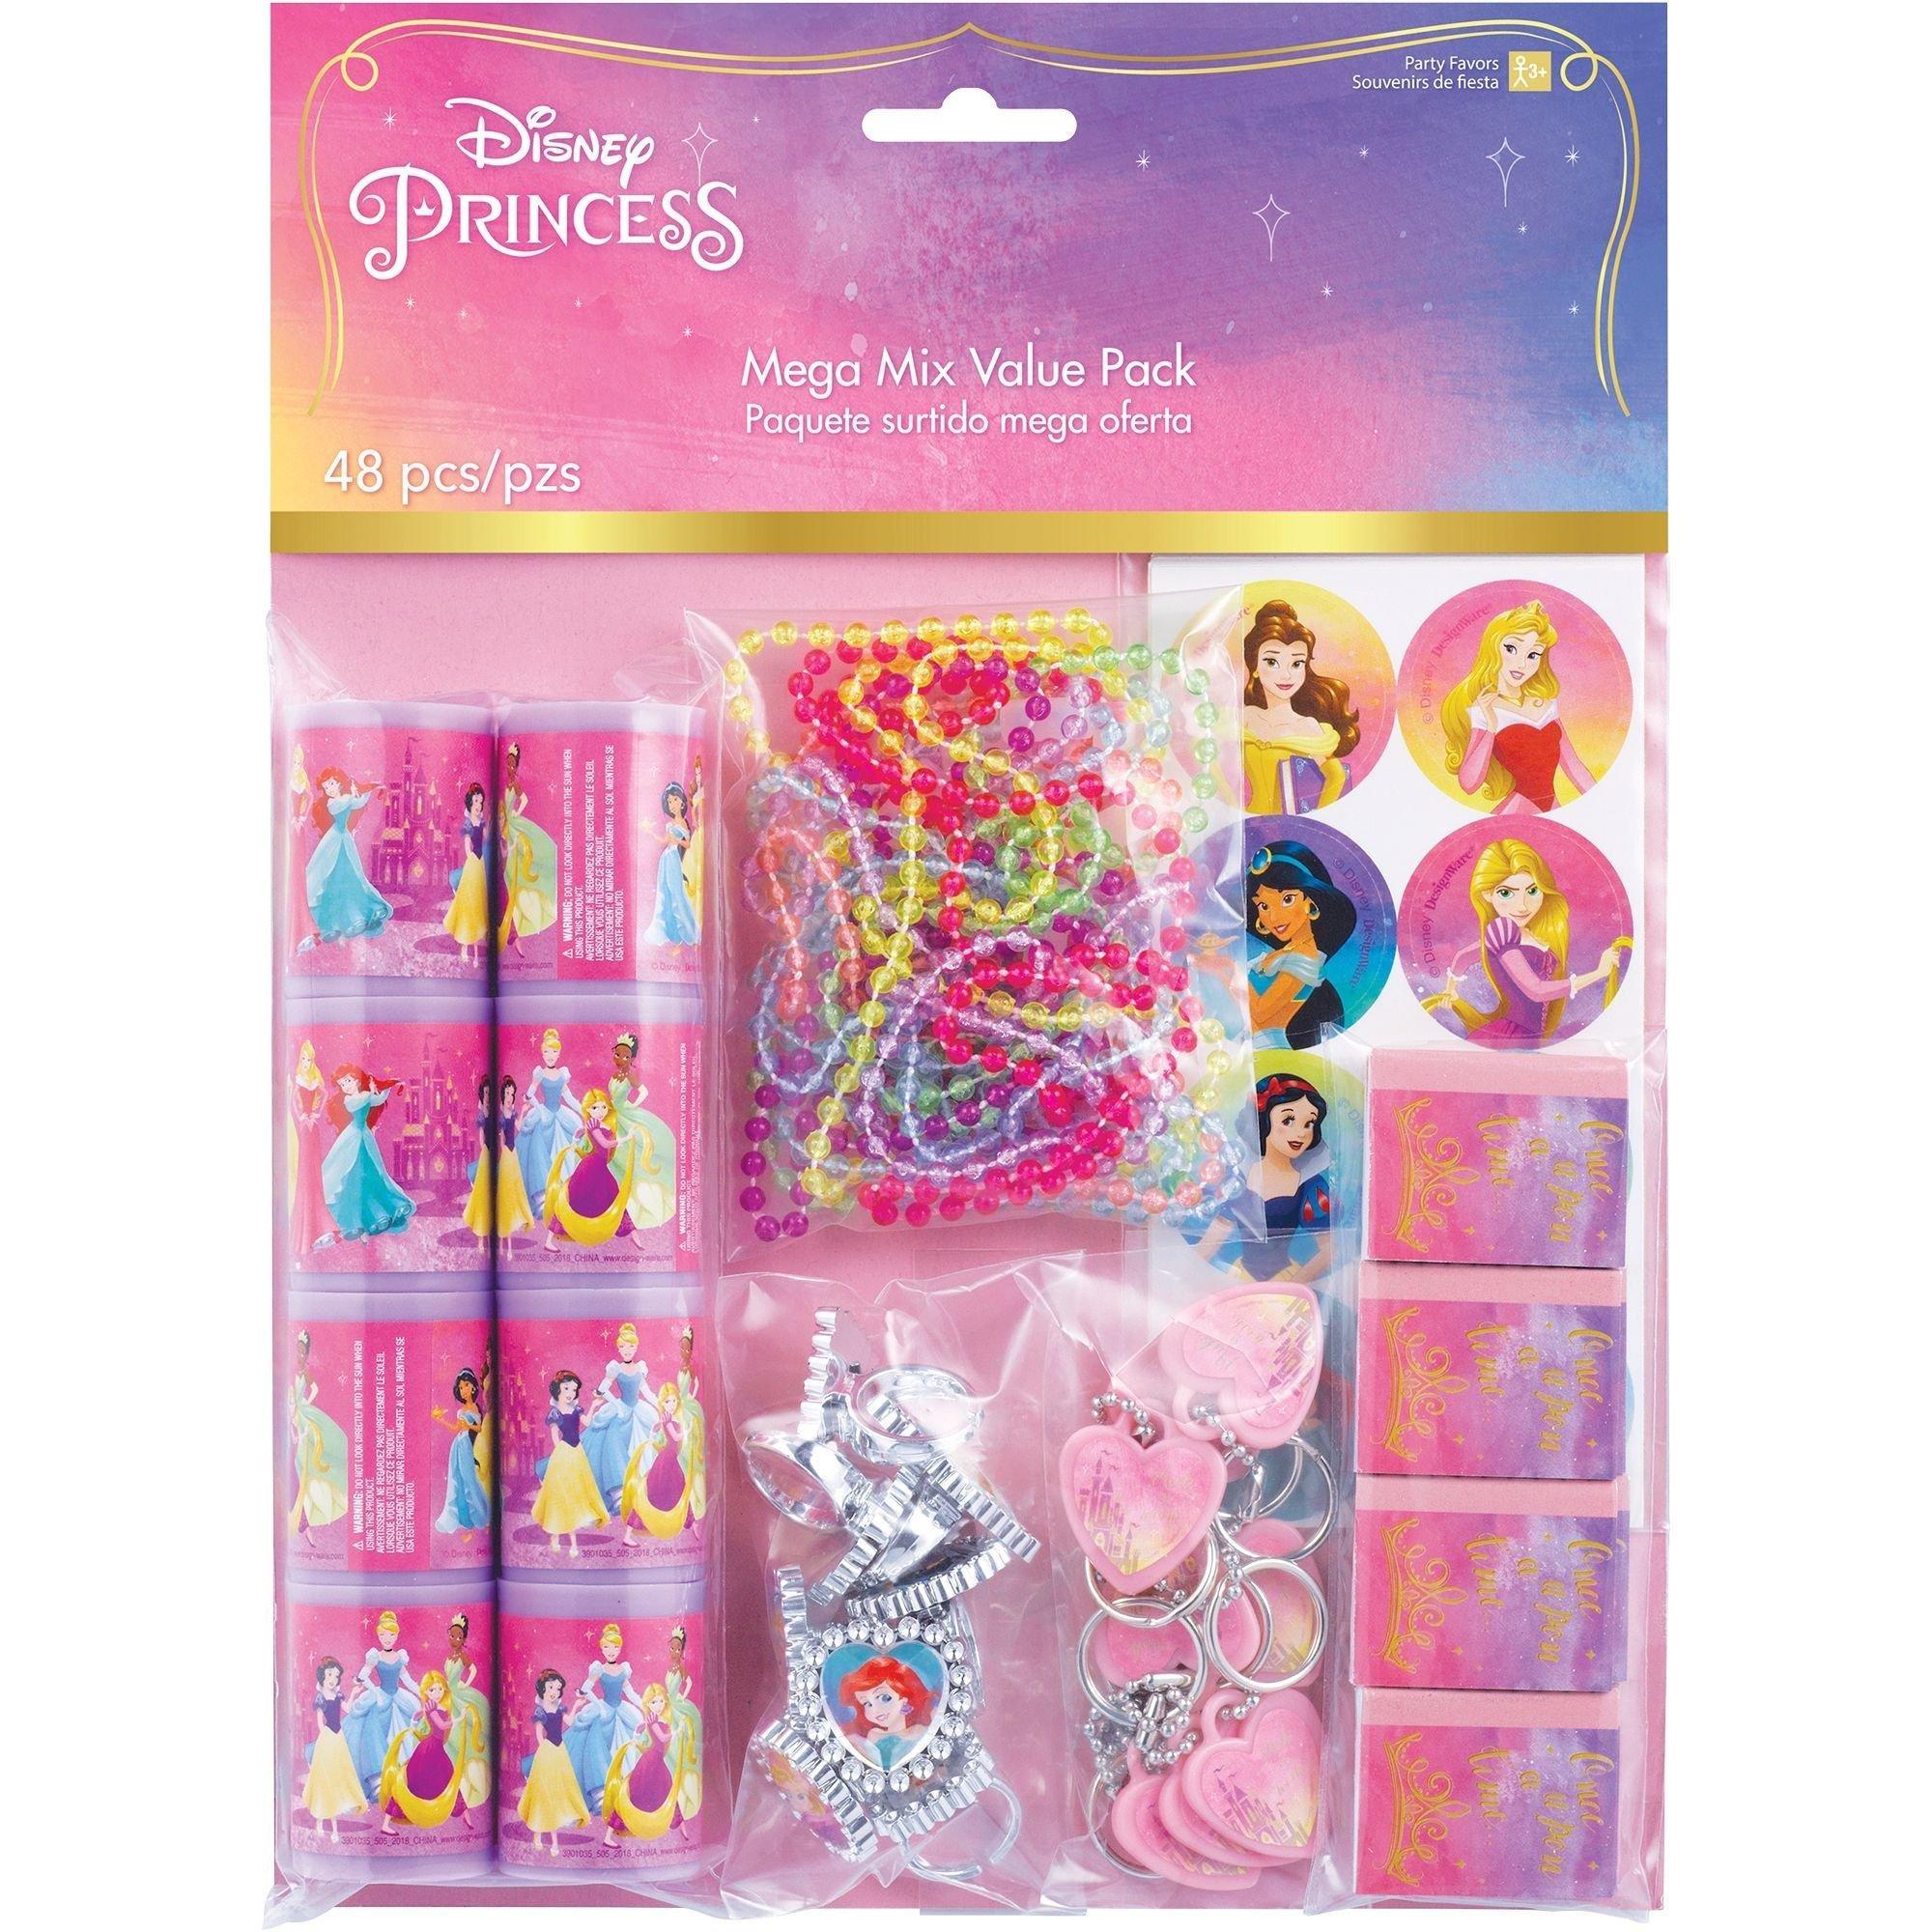 Disney Princess Party Favor Supplies Pack for 8 Guests - Kit Includes Tissue Paper, Treat Bags, Favor Pack & Hair Scrunchies